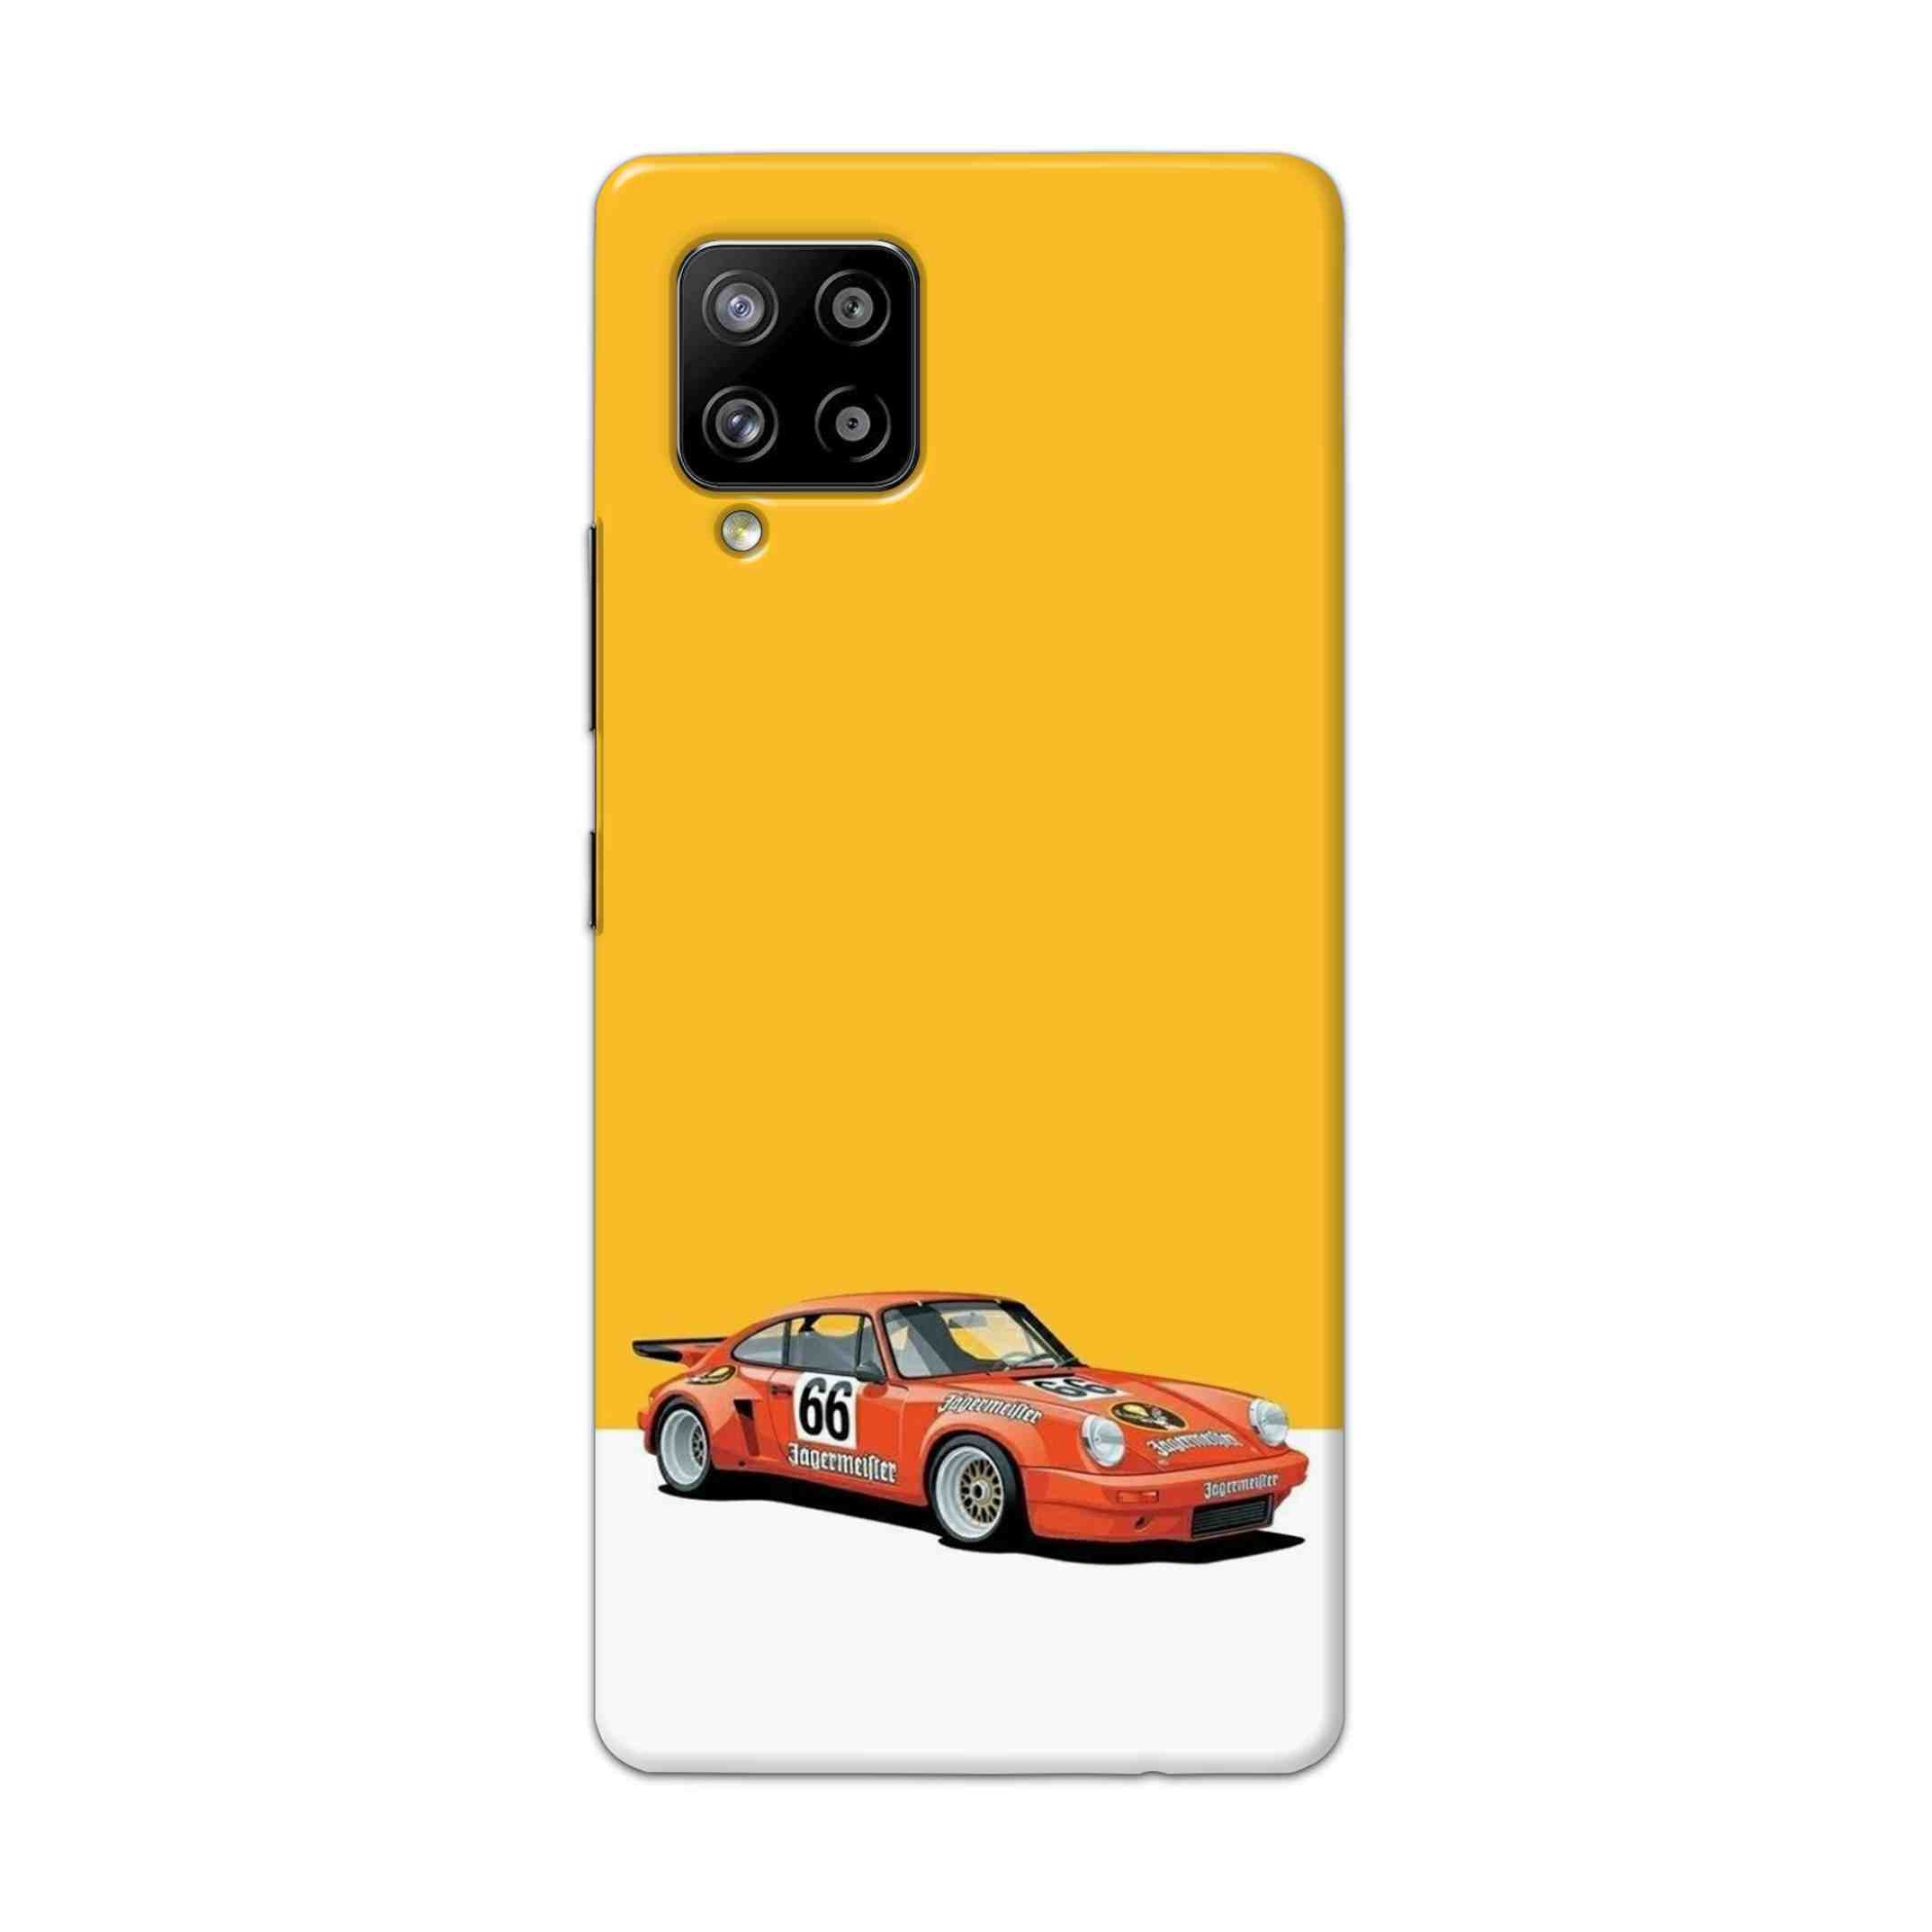 Buy Porche Hard Back Mobile Phone Case Cover For Samsung Galaxy M42 Online